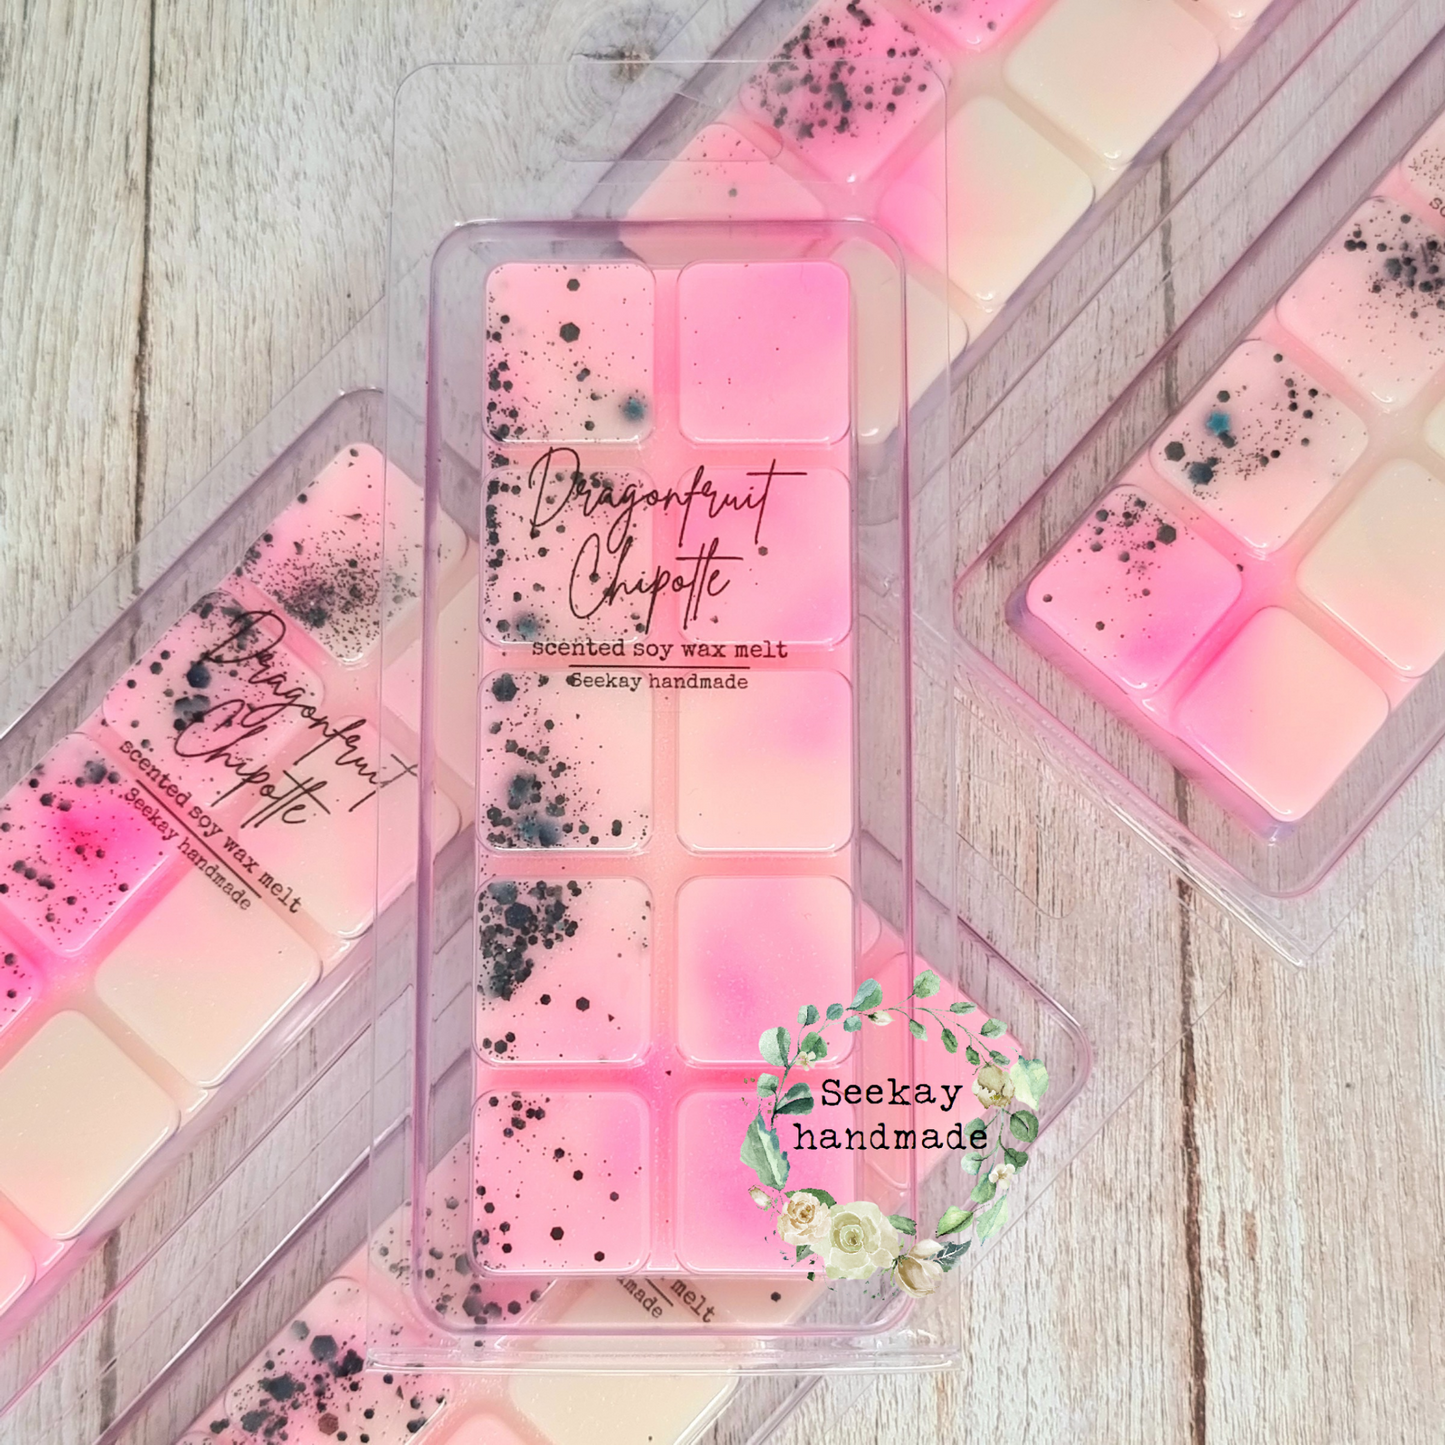 Dragonfruit Chipotle scented soy wax melt